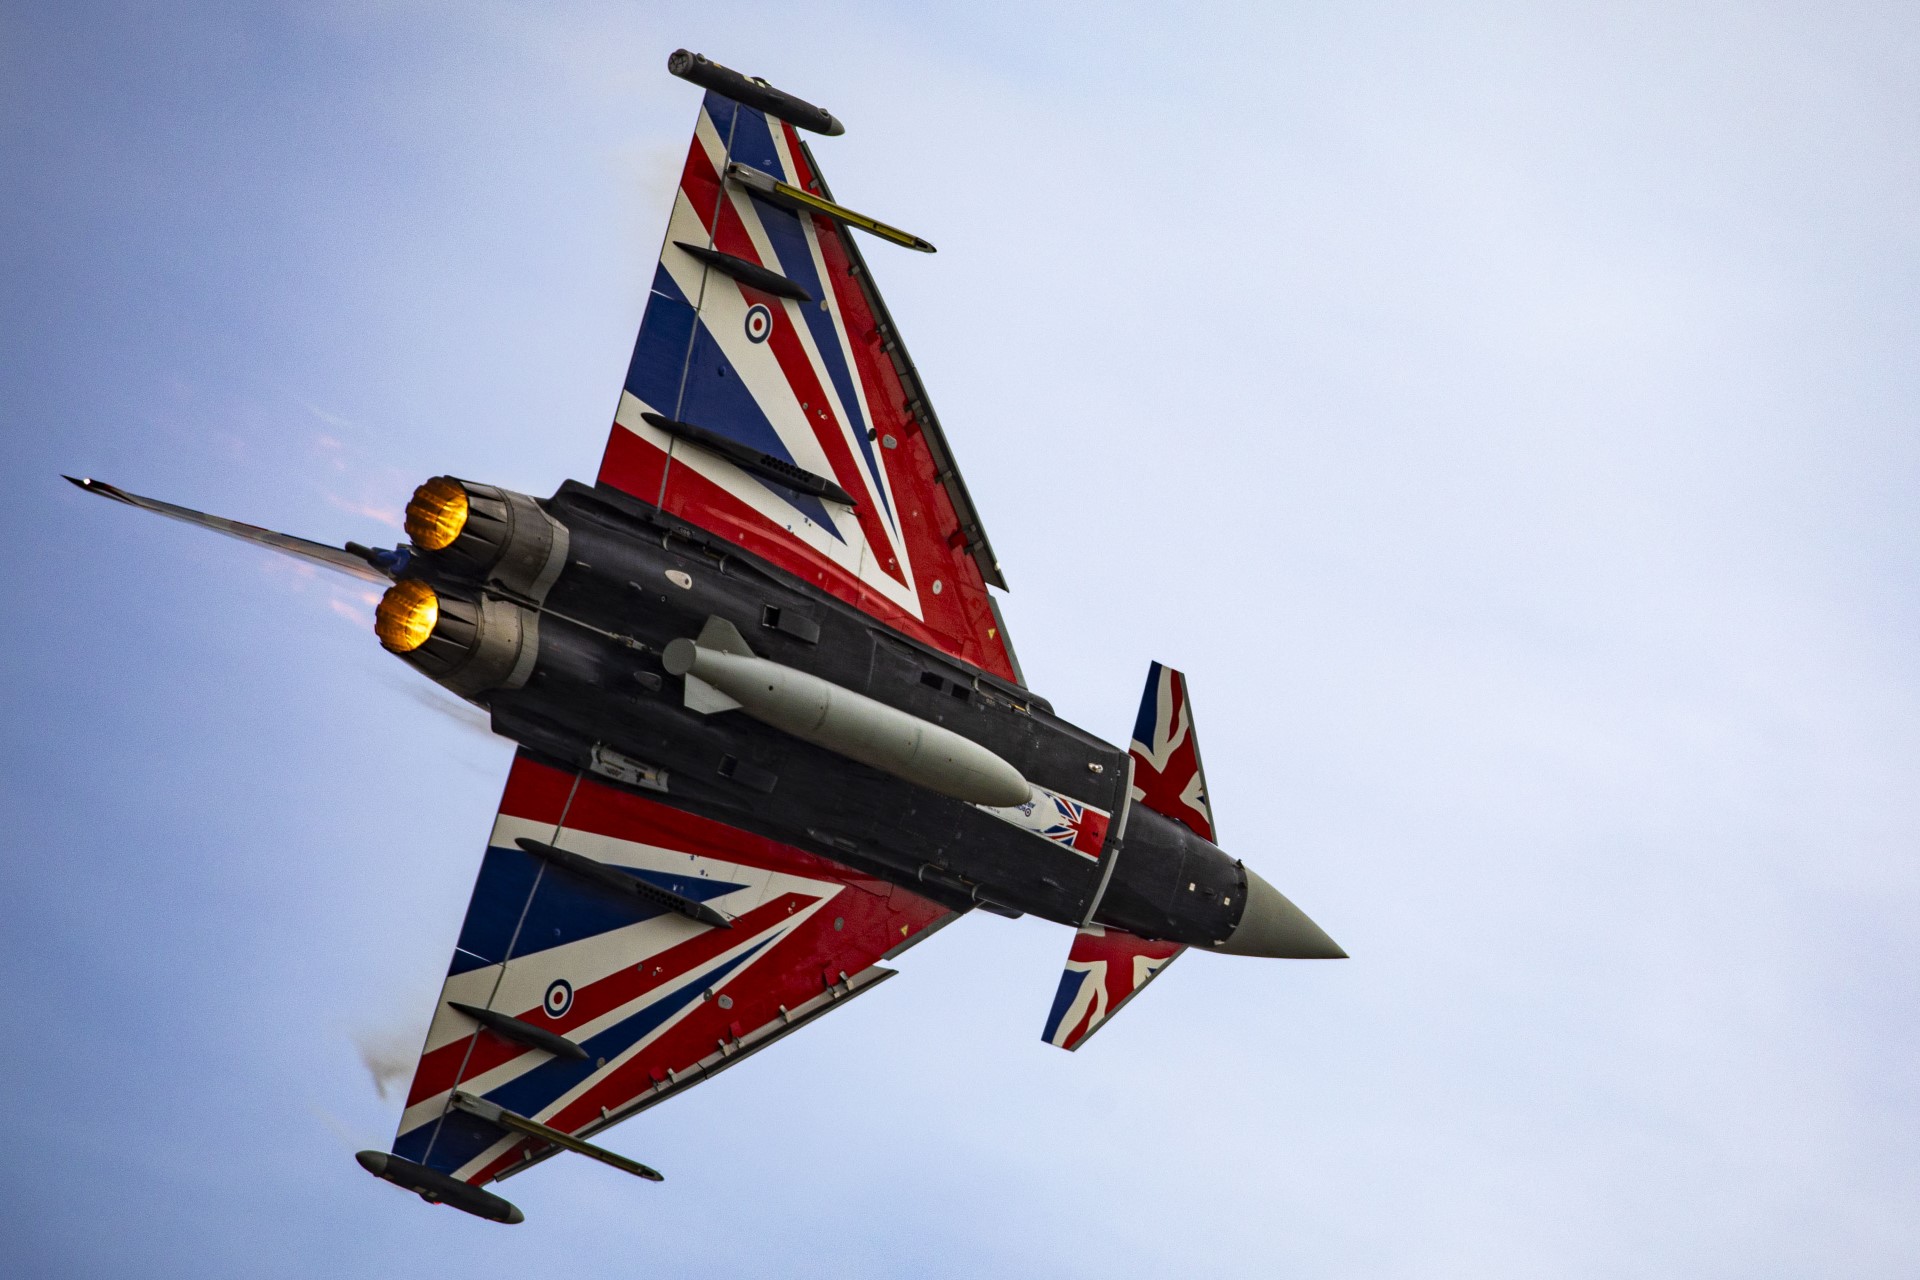 Typhoon display aircraft in flight, showing union jack painting on undercarriage